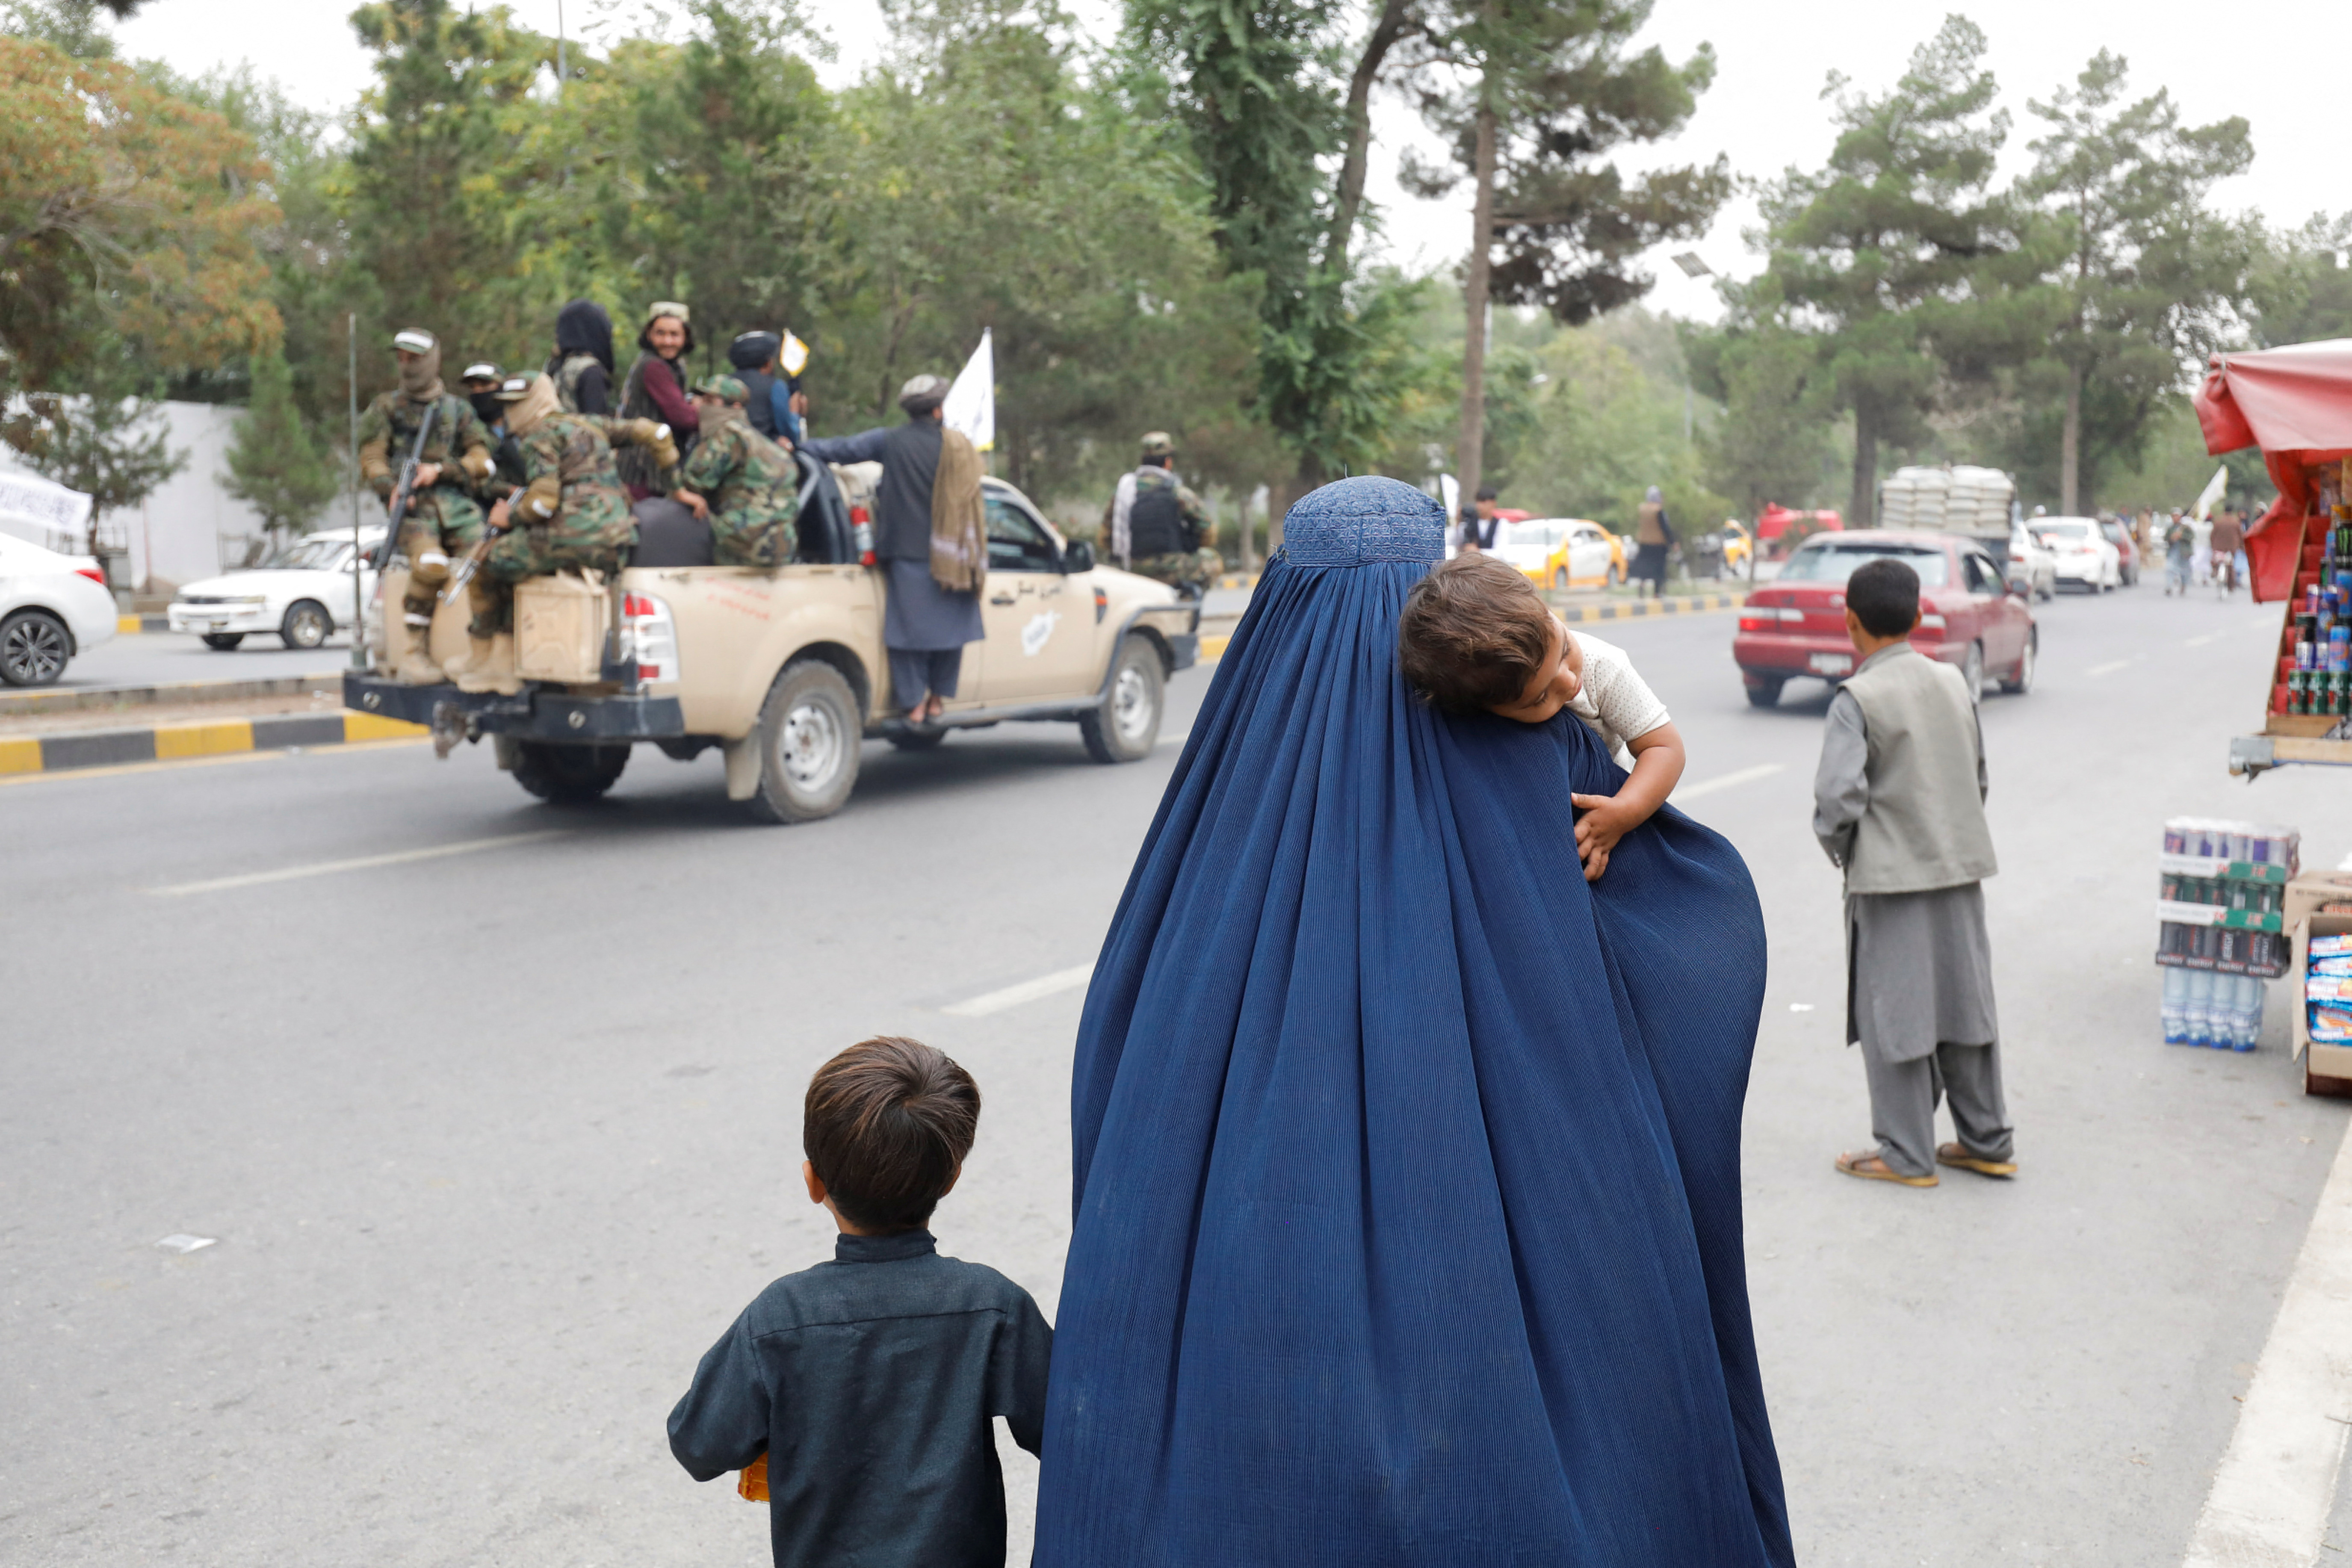 An Afghan woman walks with her children on the anniversary of the fall of Kabul on a street in Kabul